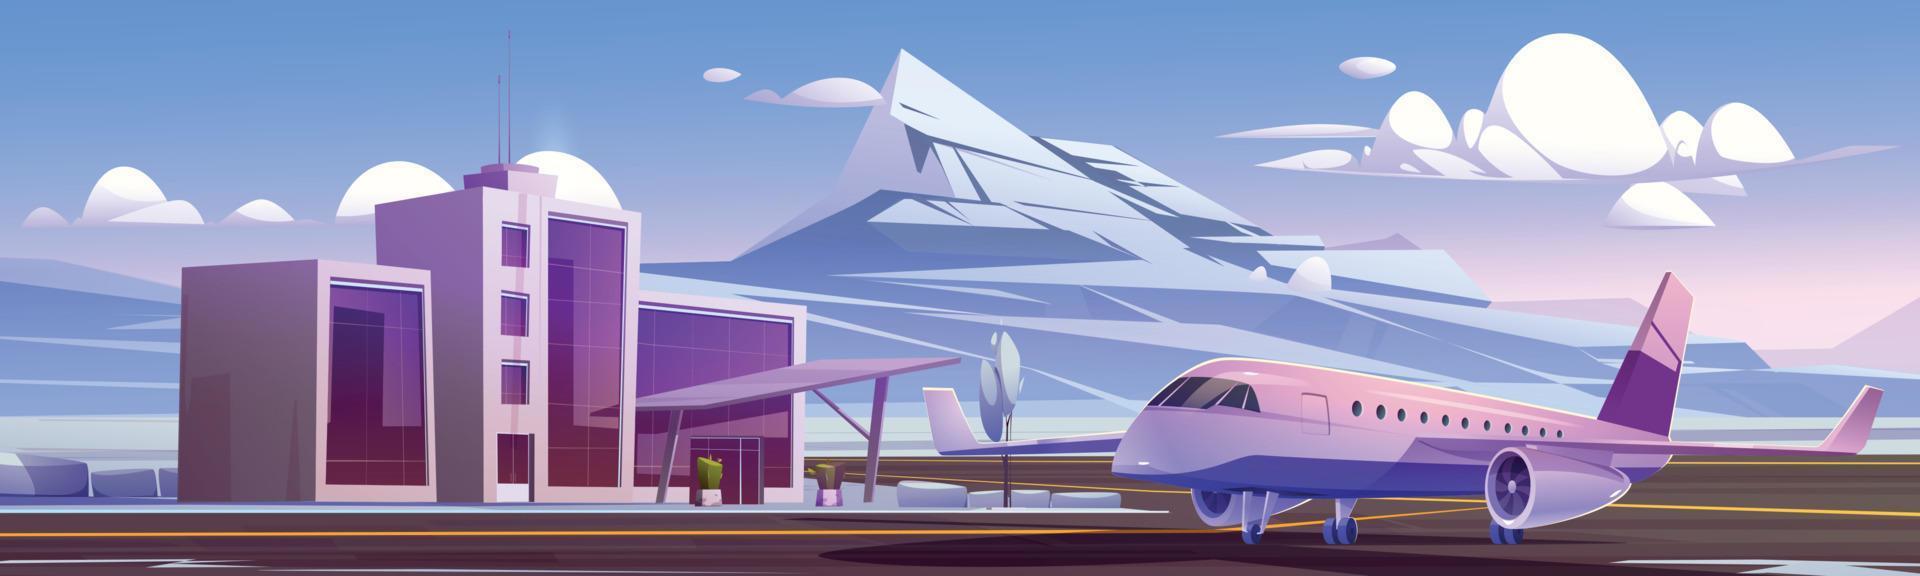 Airport terminal and plane in winter vector